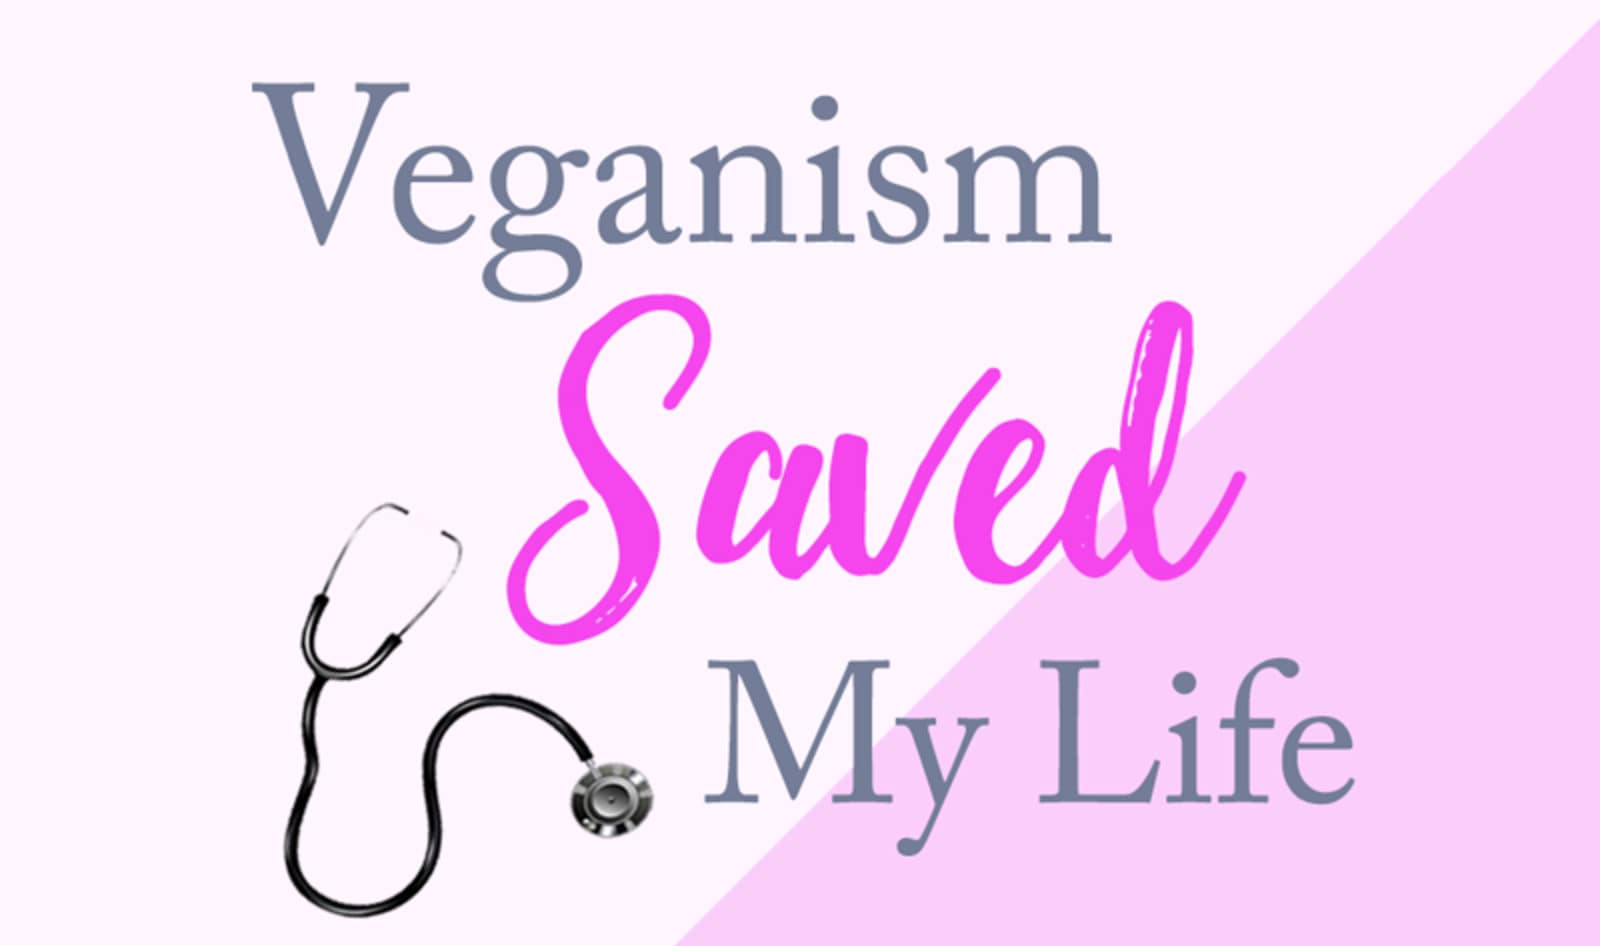 Applications Open for <I>Veganism Saved My Life</i> Feature in VegNews Magazine